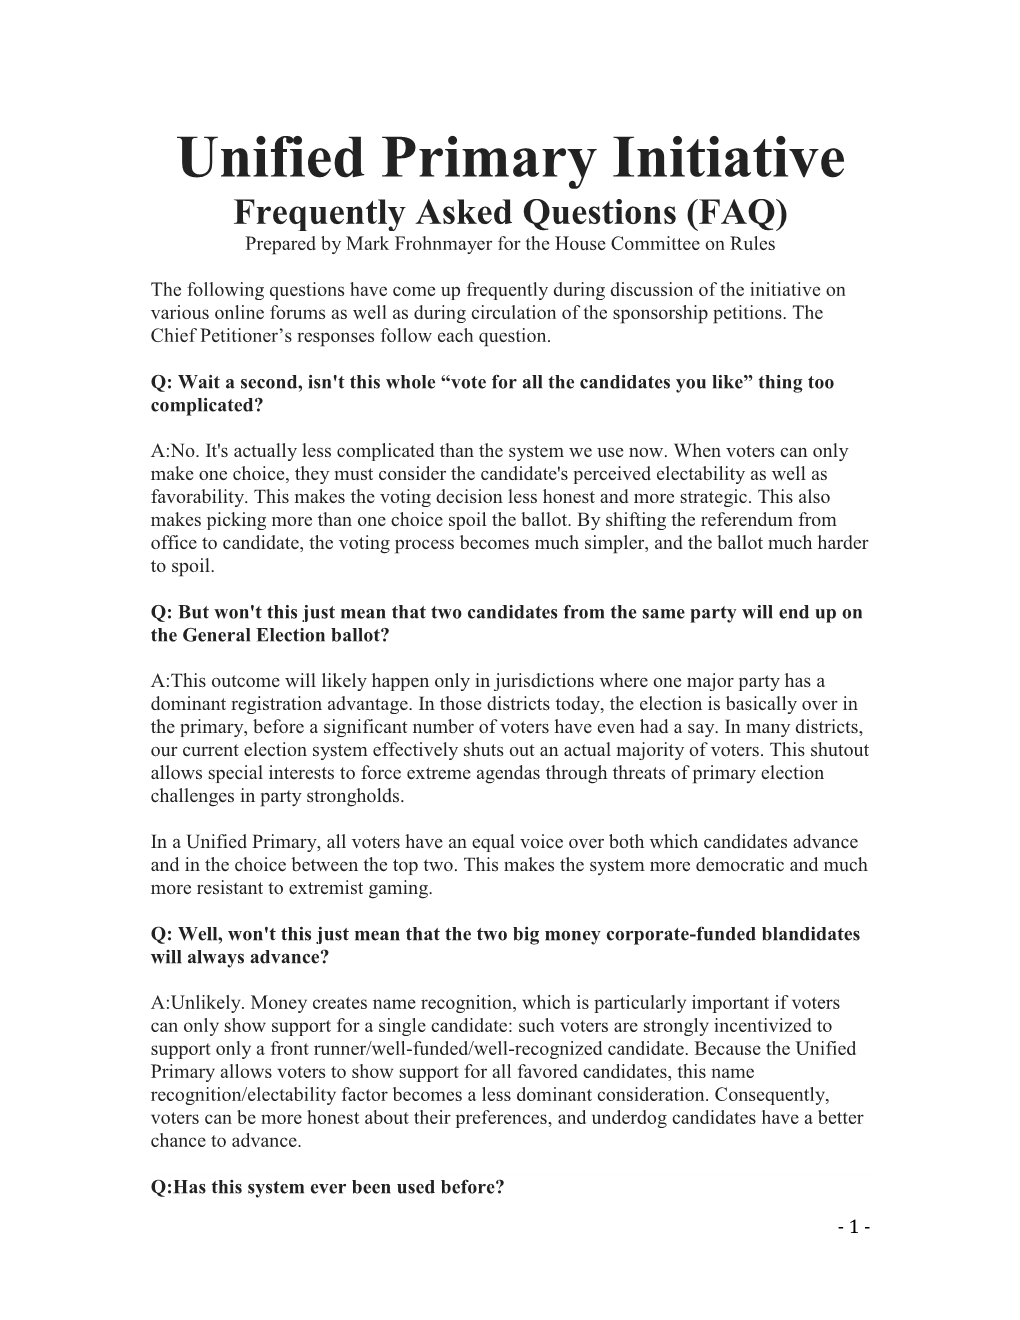 Unified Primary Initiative Frequently Asked Questions (FAQ) Prepared by Mark Frohnmayer for the House Committee on Rules